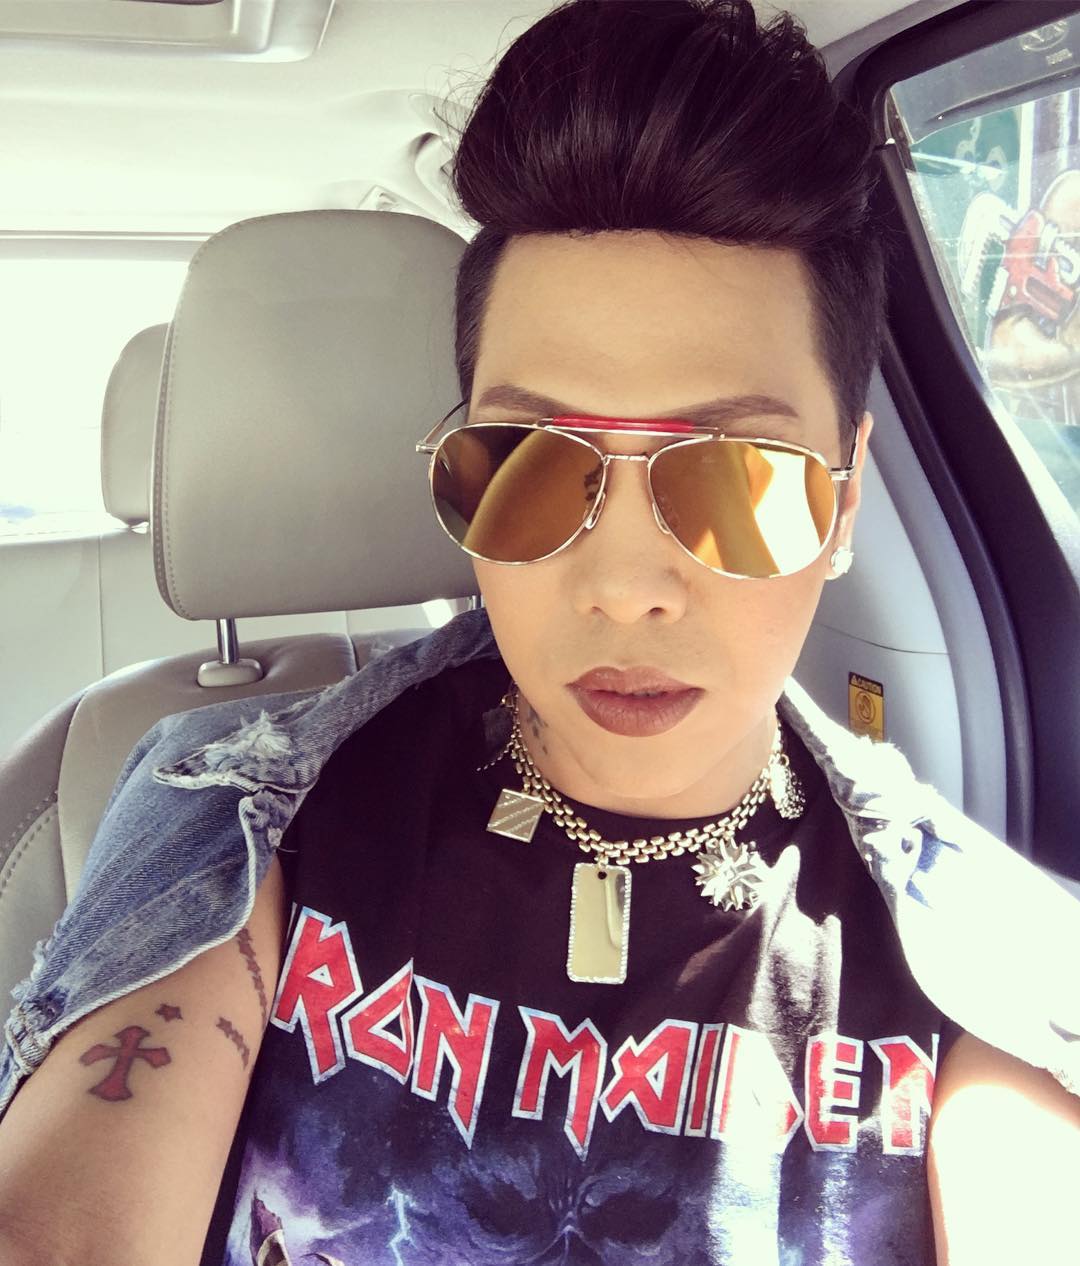 LOOK: 39 Times 'Viceral' made our hearts swoon with his pogi looks